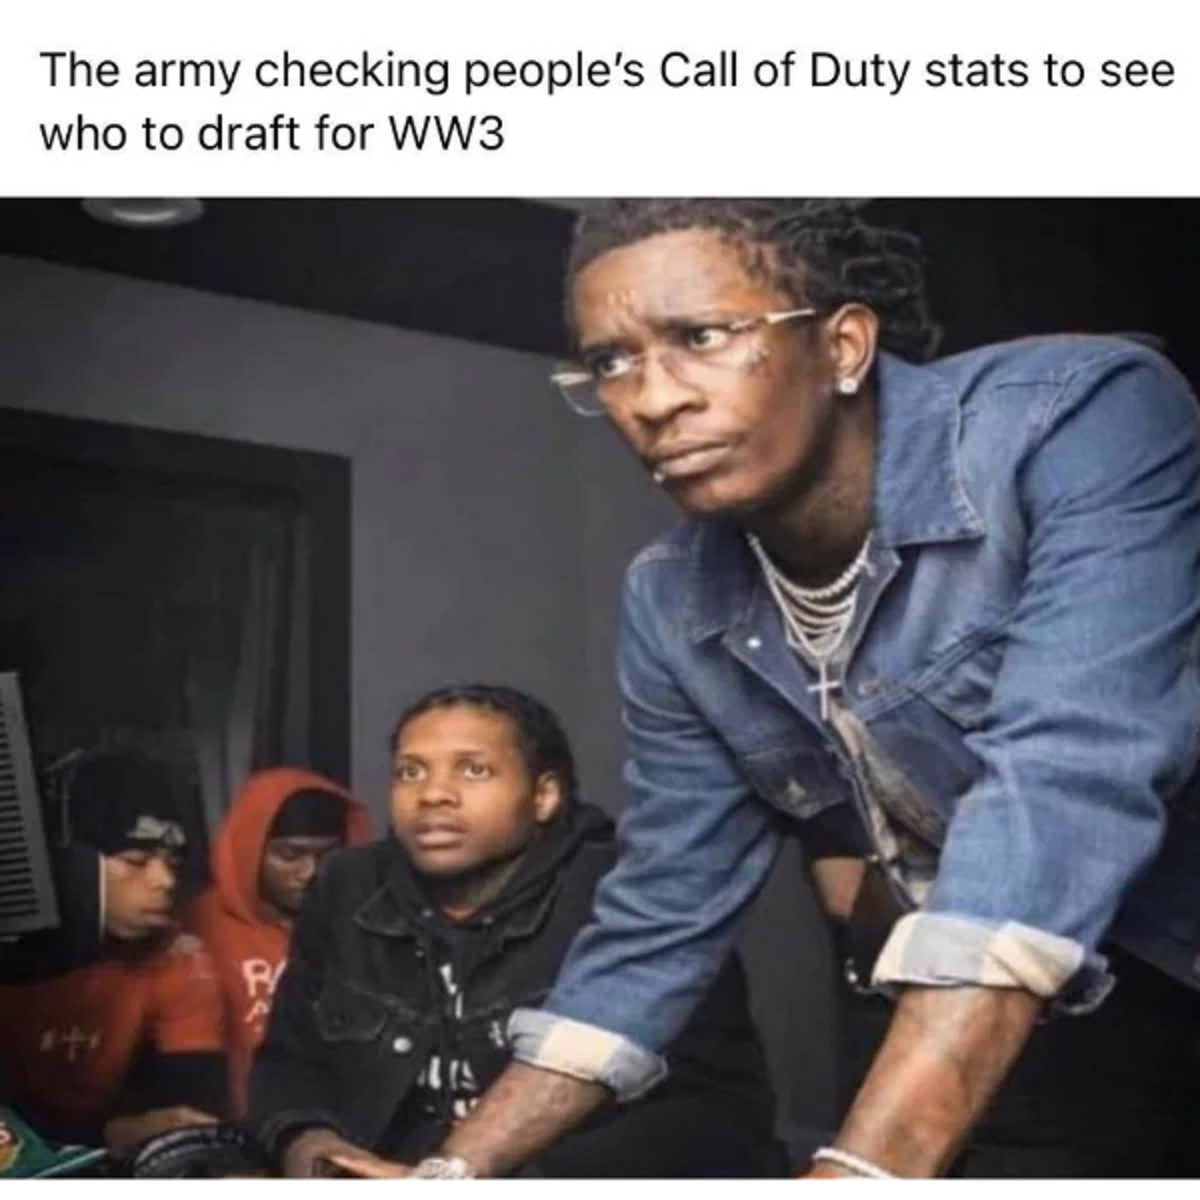 photo caption - The army checking people's Call of Duty stats to see who to draft for WW3 P 415